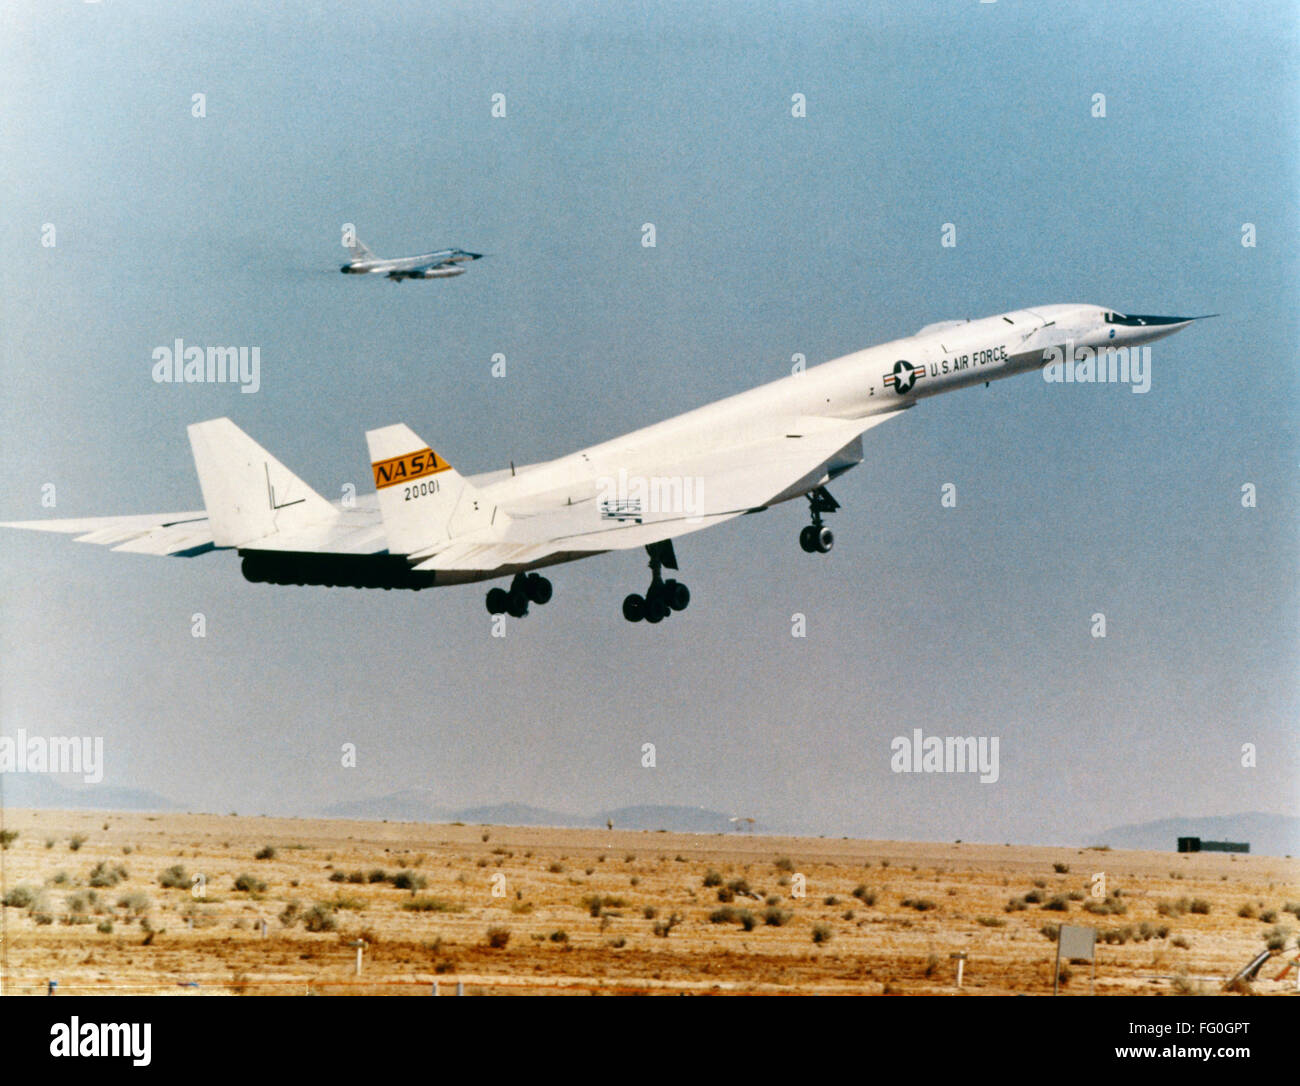 EXPERIMENTAL PLANE: XB-70. /nThe North American Aviation XB-70 strategic bomber, developed by NASA and the U.S. Air Force, taking off during a test flight at Edwards, California. Photograph, c1968. Stock Photo